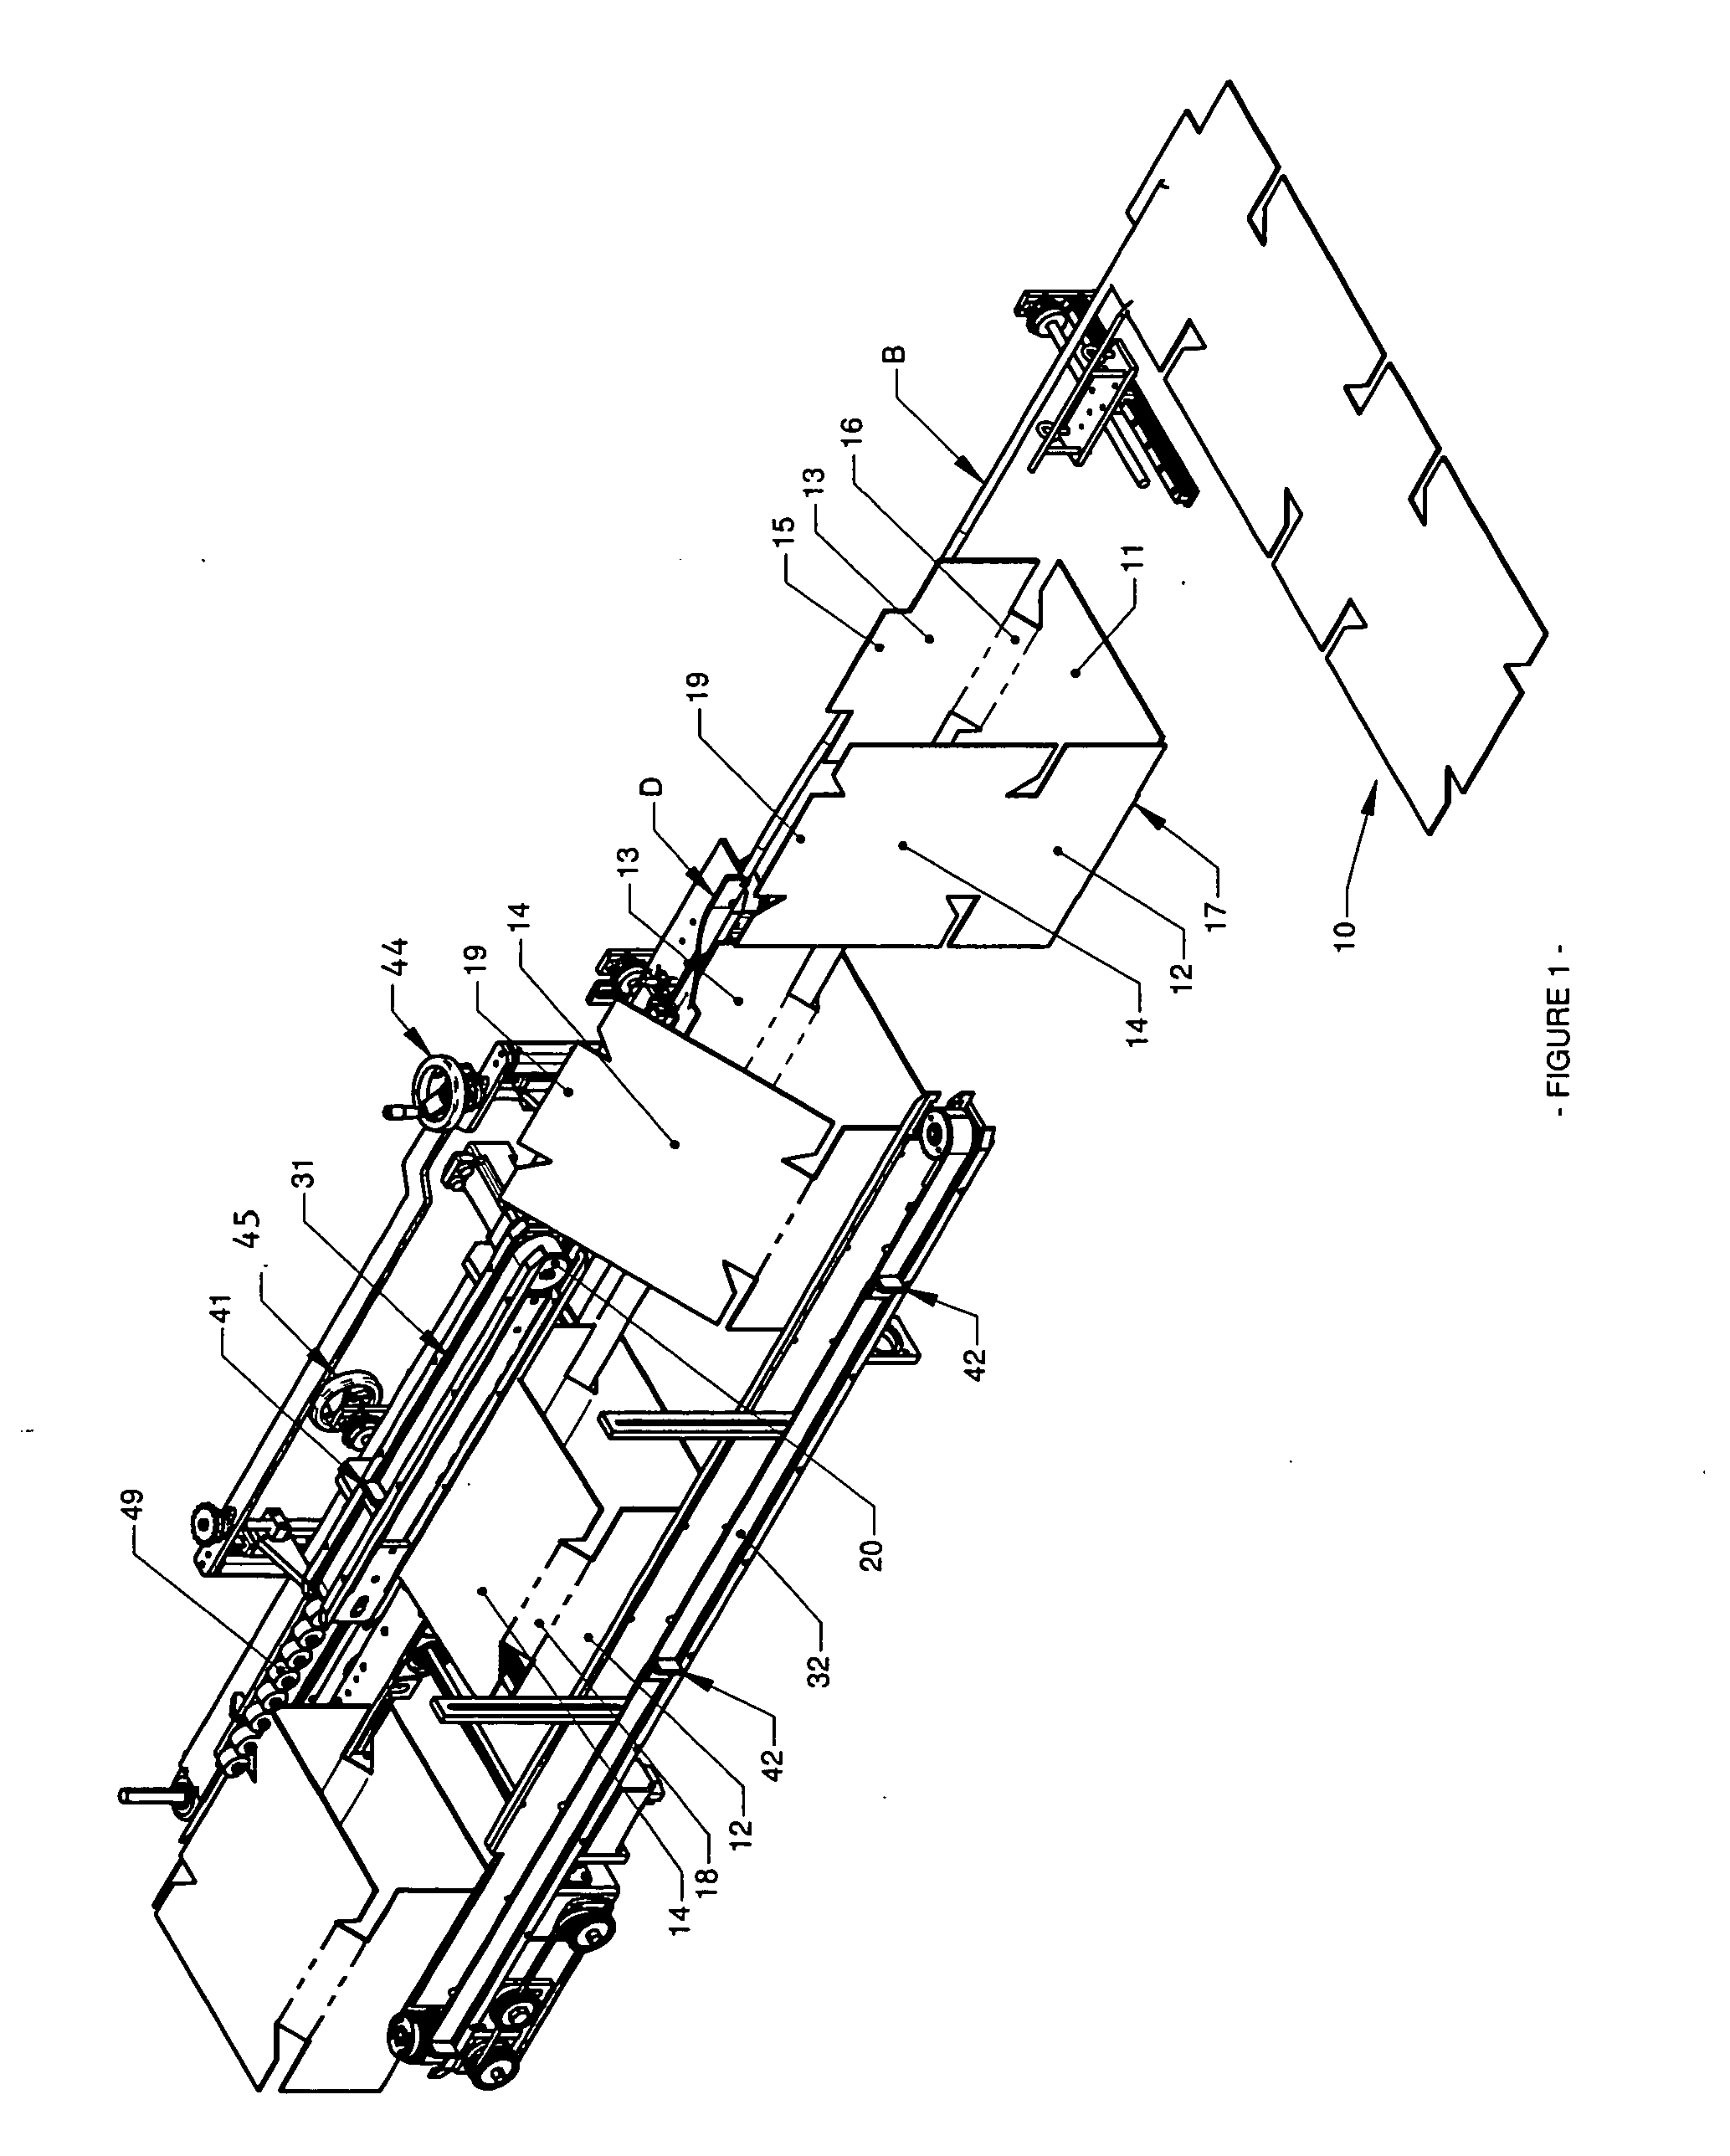 Method and apparatus for forming multi-sided containers